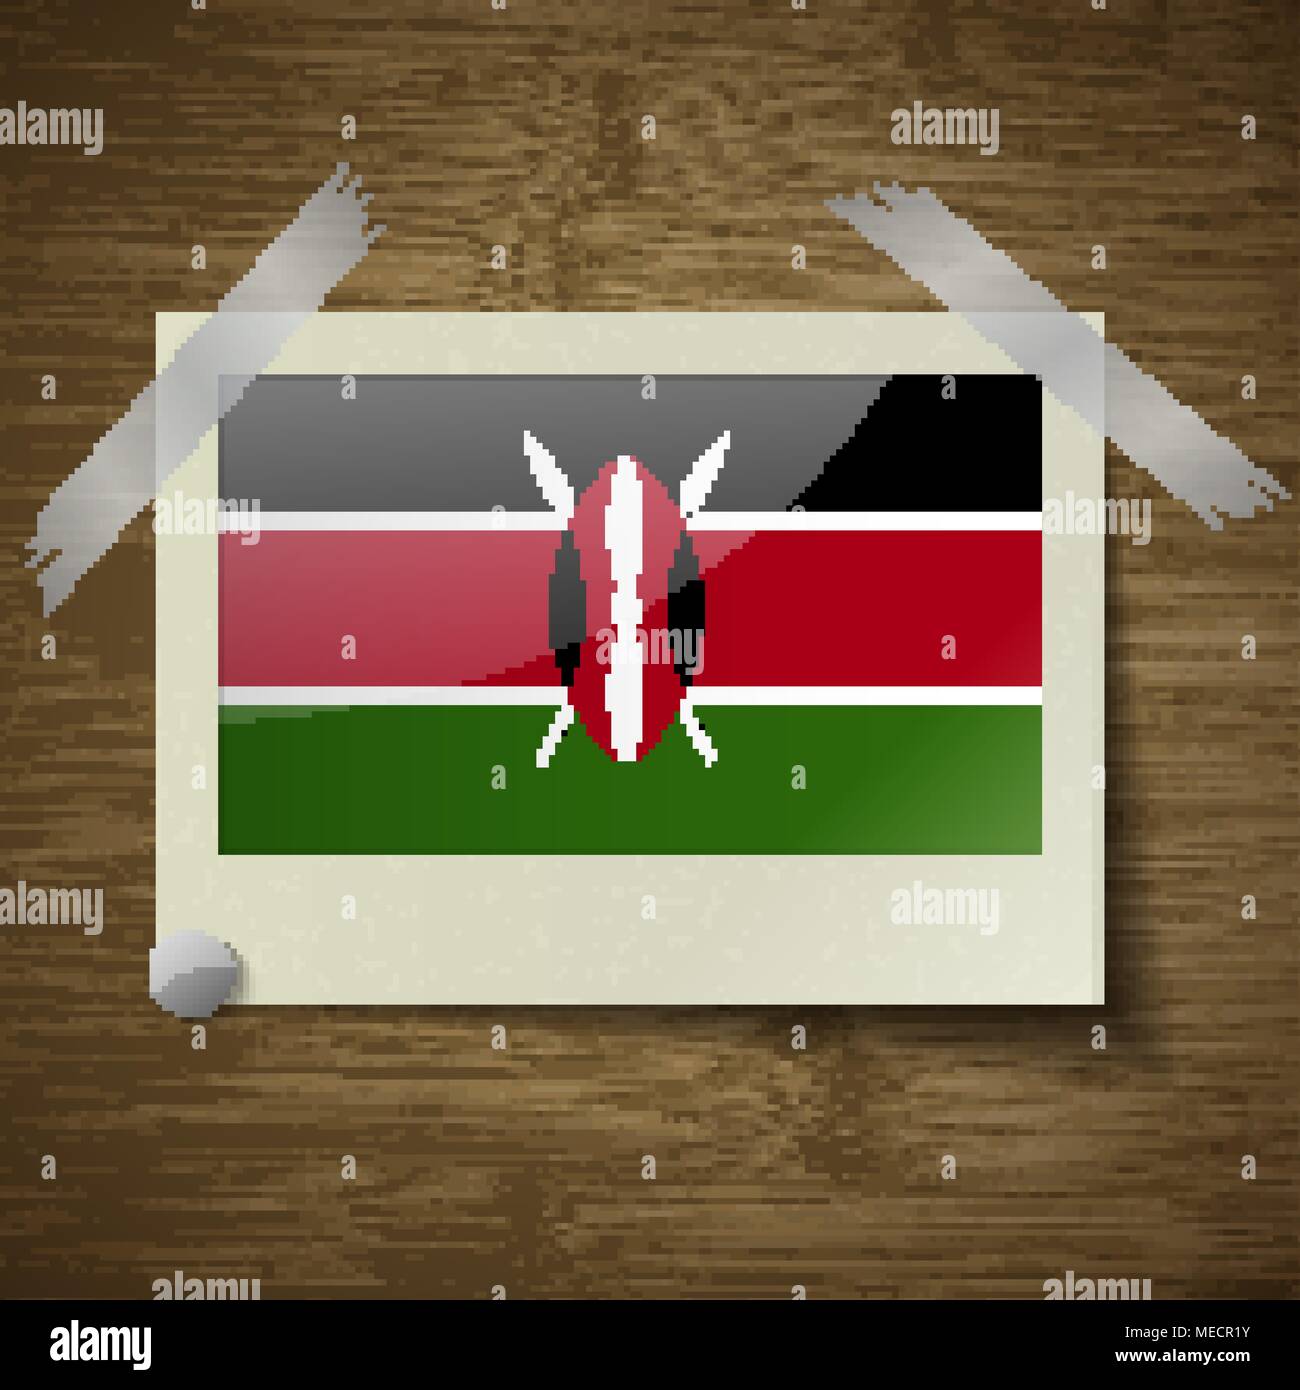 Flags of Kenya at frame on wooden texture. Vector illustration Stock Vector